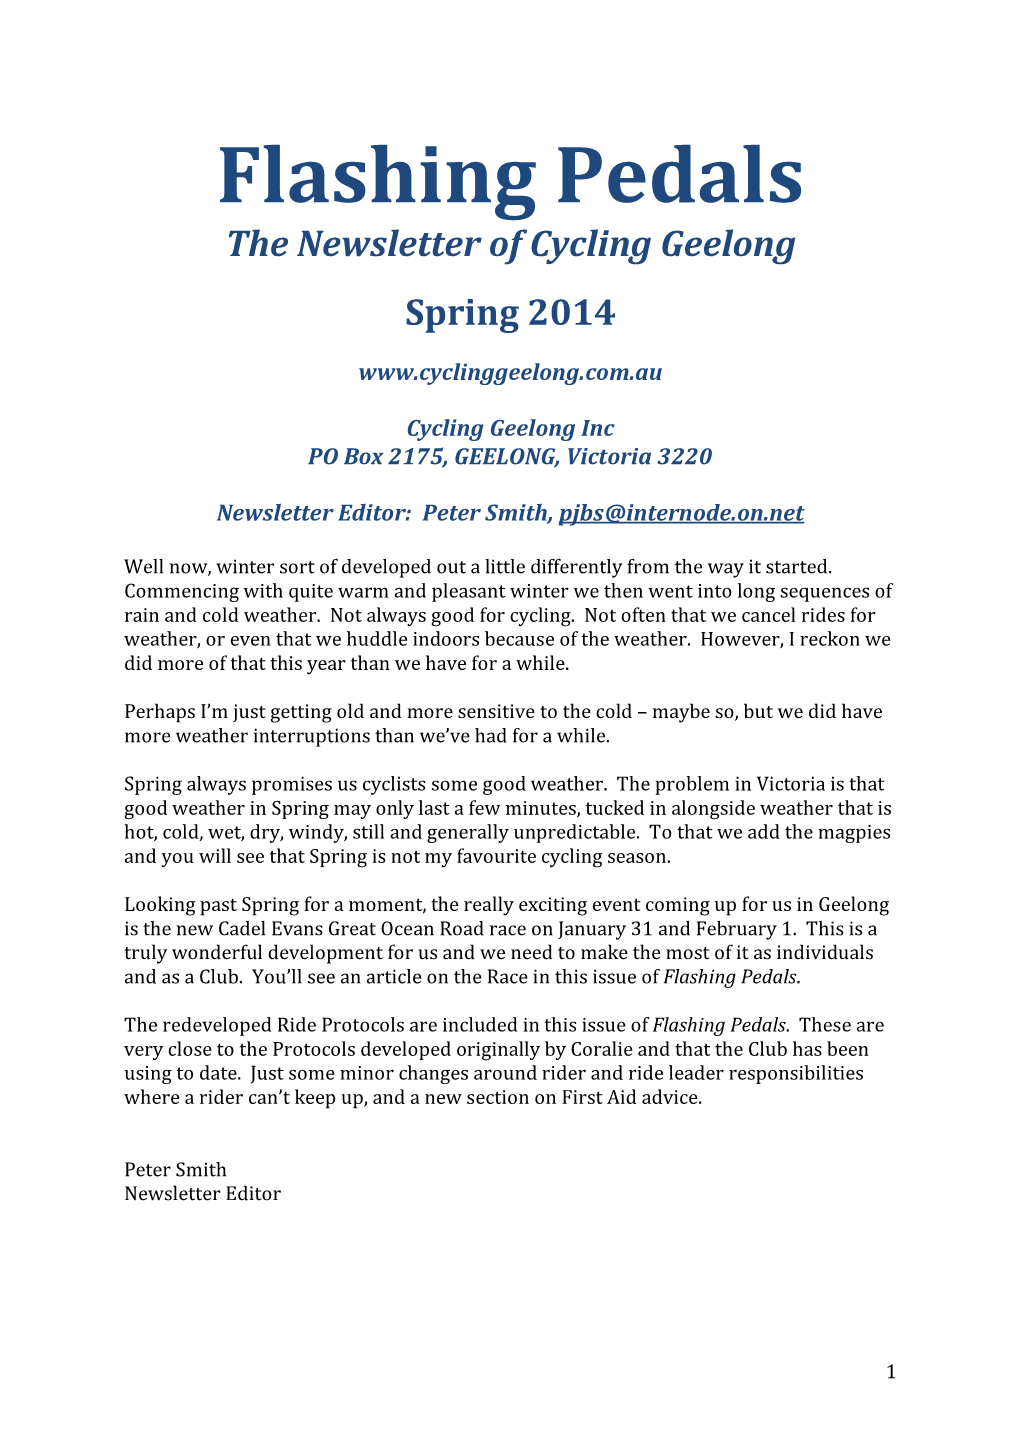 Flashing Pedals the Newsletter of Cycling Geelong